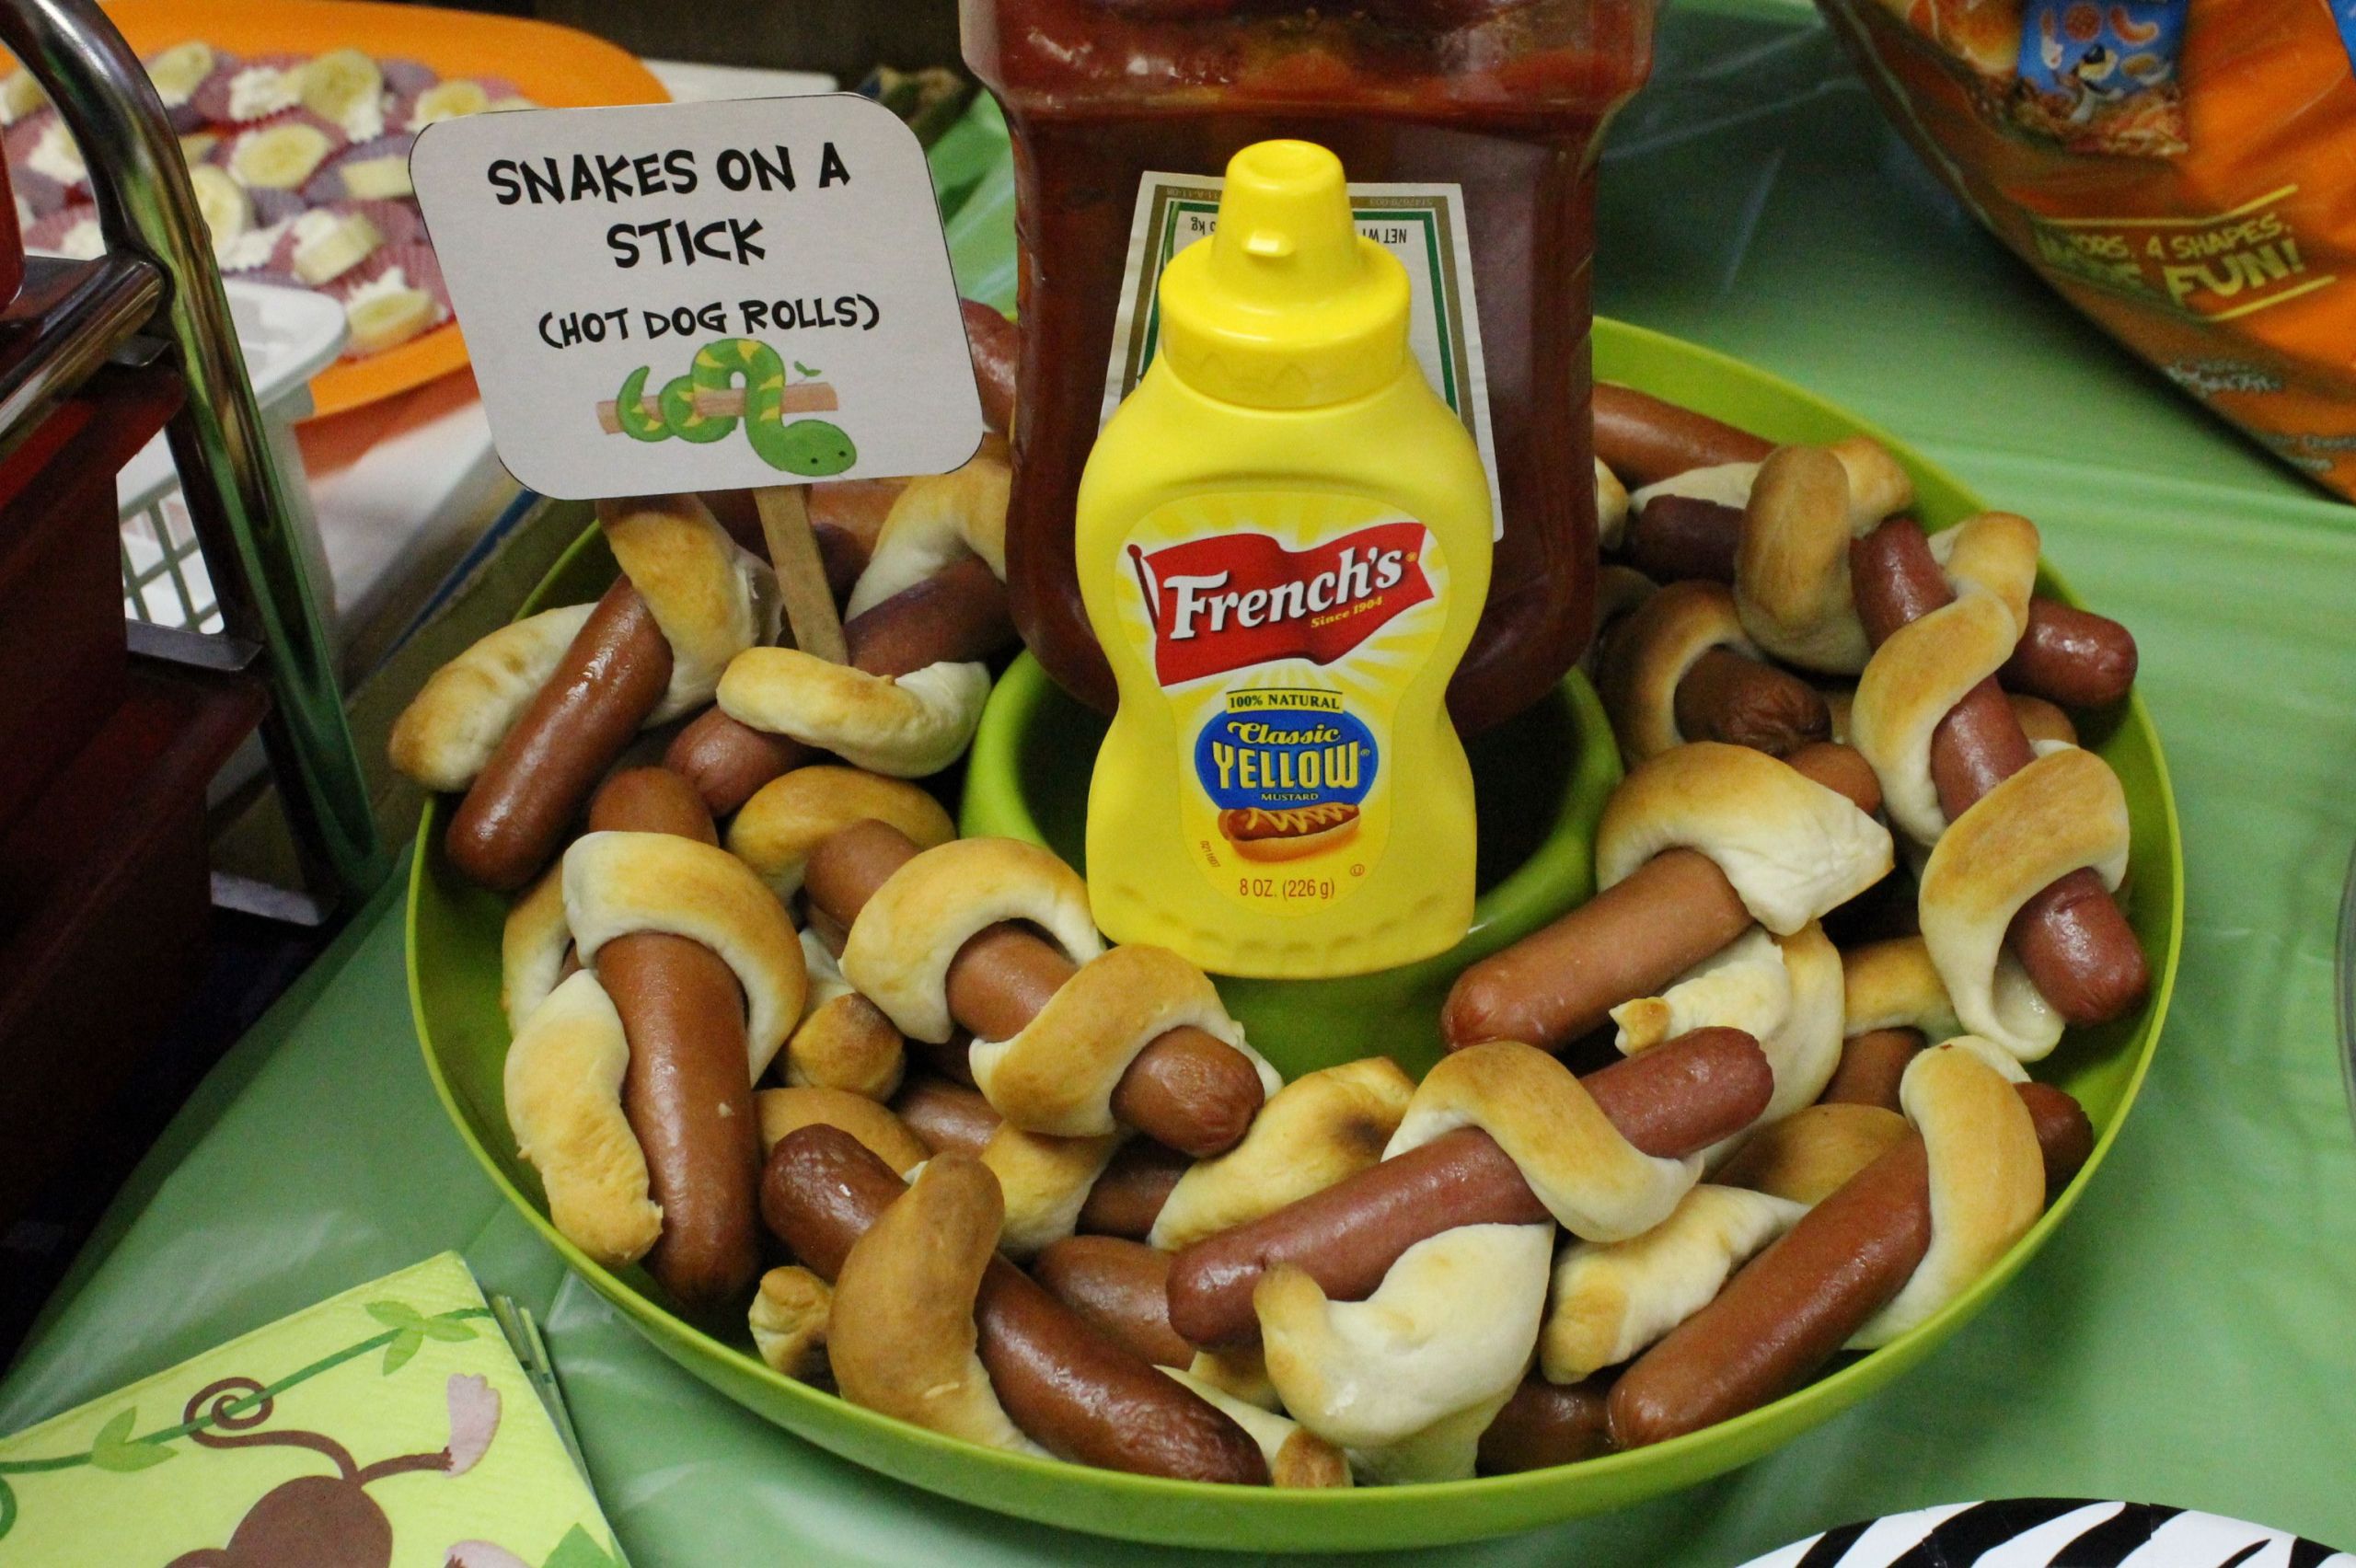 Zoo Birthday Party Food Ideas
 Indiana Jones Party Food Snakes on a Stick Dogs aka